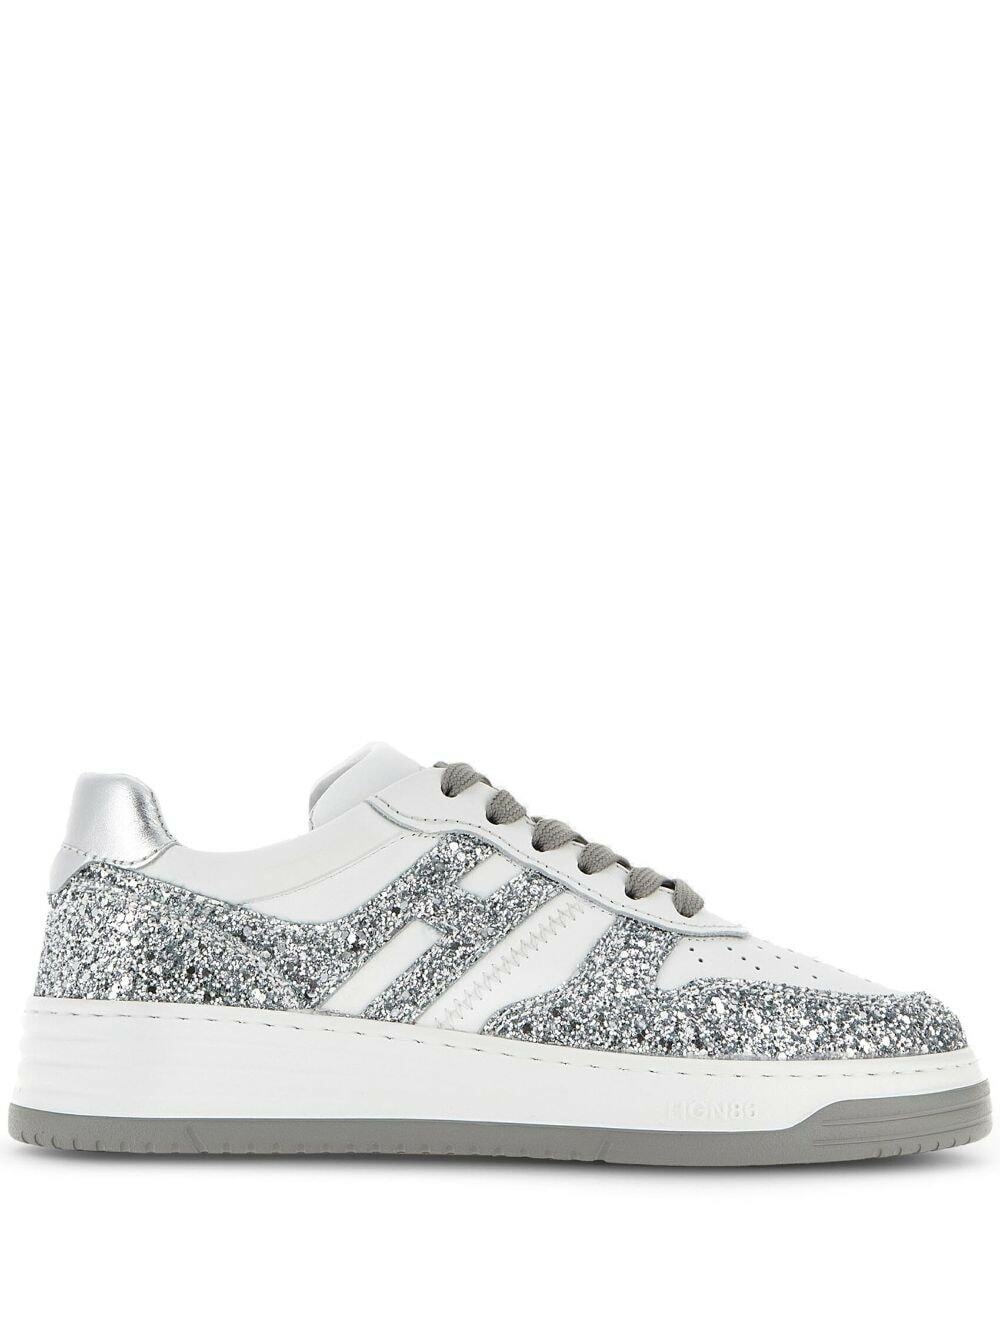 HOGAN - H630 Leather And Glitter Sneakers Hogan